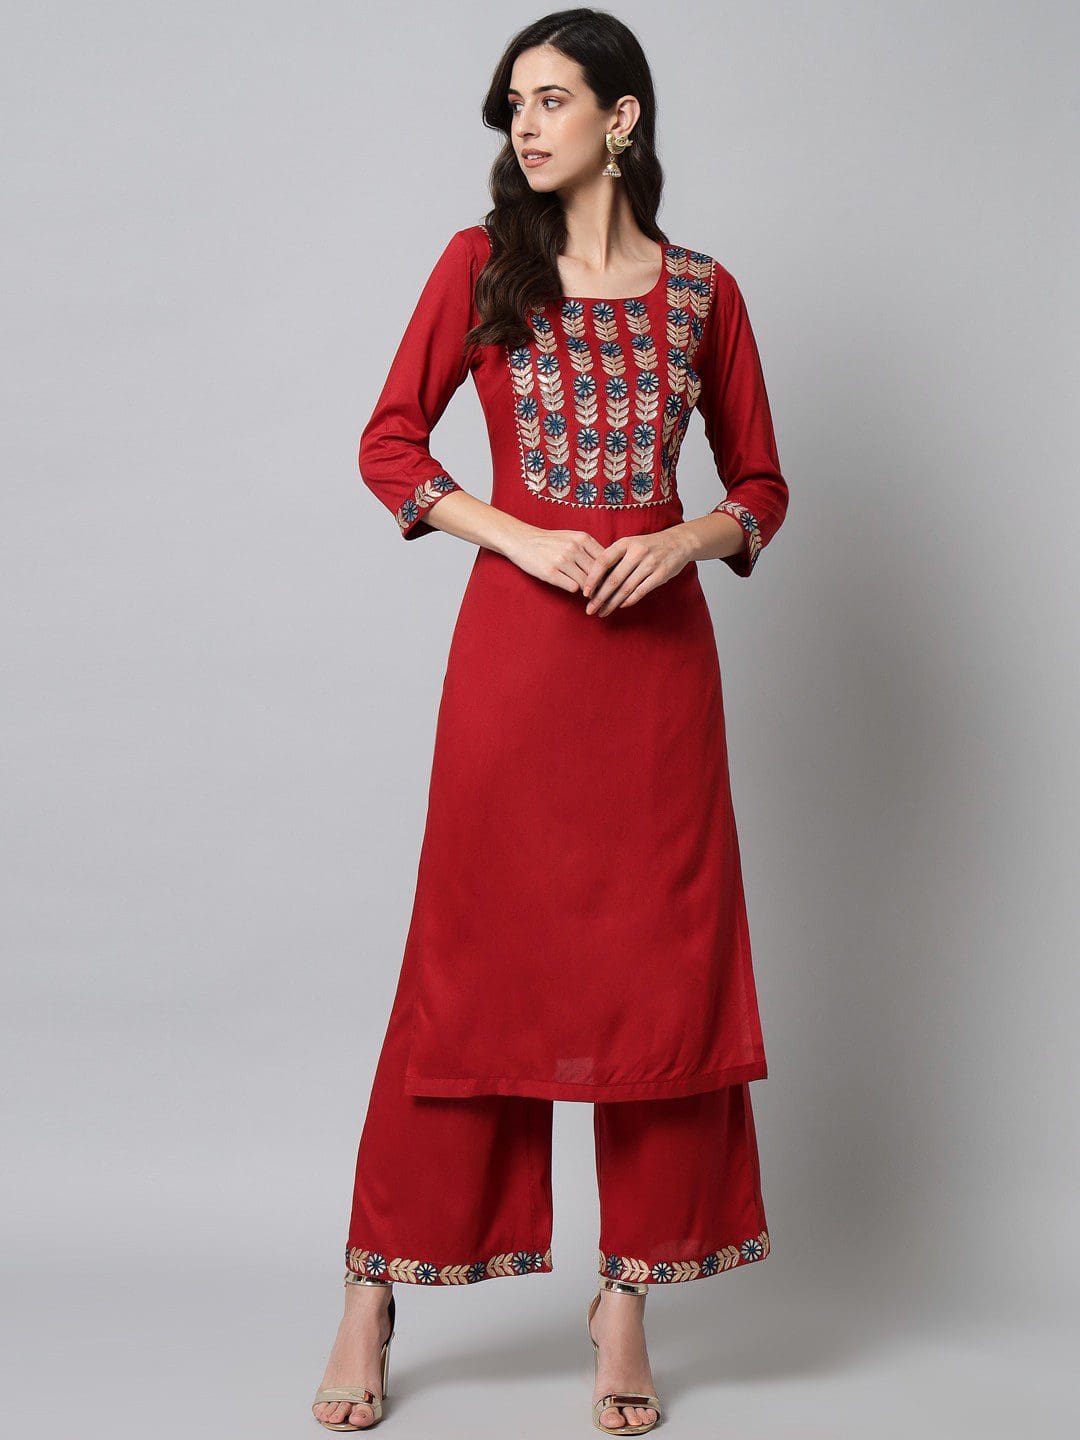 Exclusive Rayon Embroidery Red kurta With Palazzo For Women.